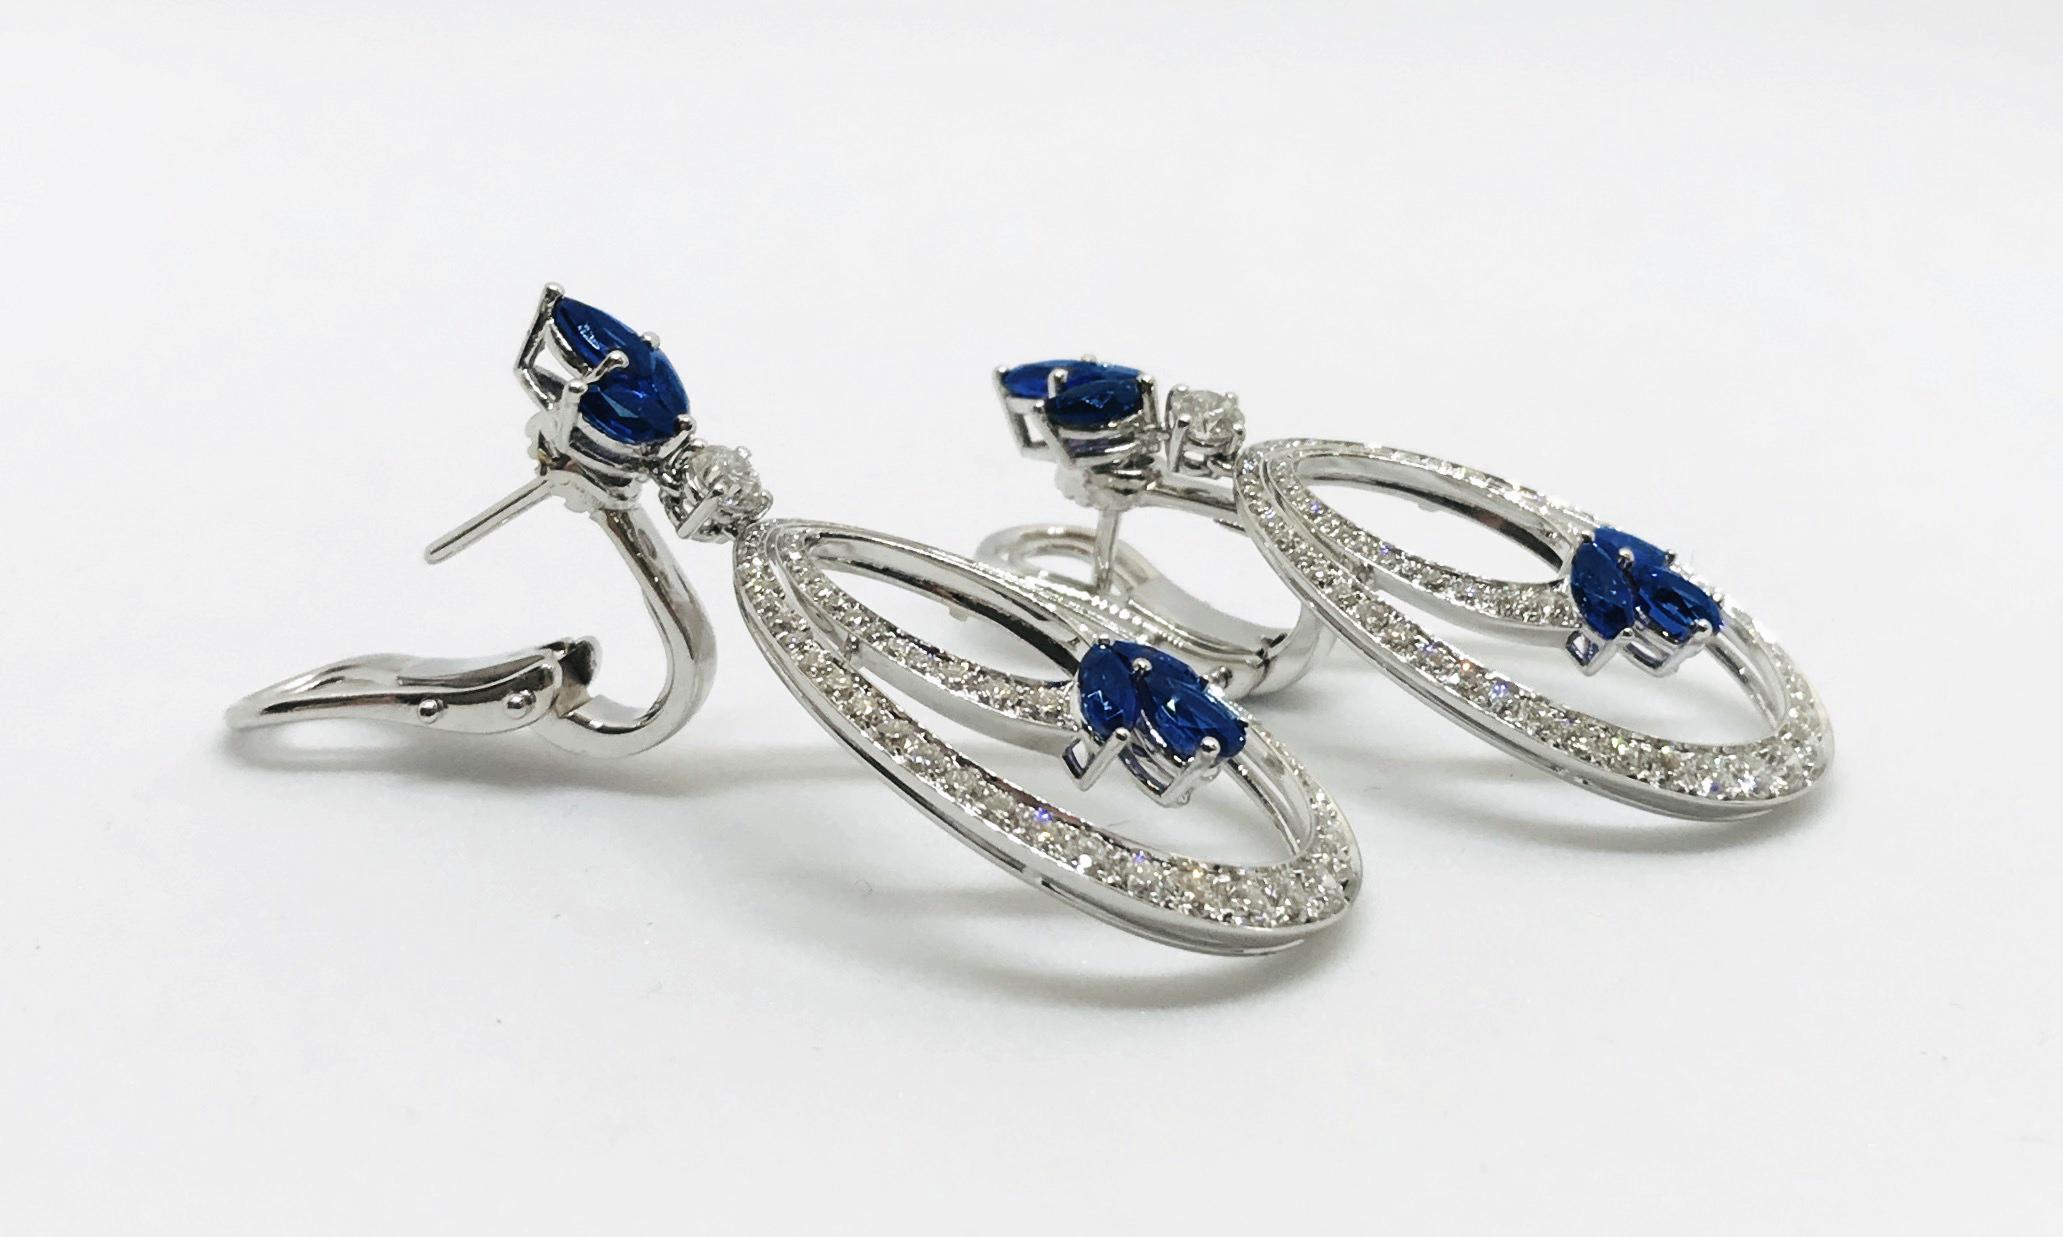 Picchiotti 2.13 carats diamond and 3.34 carats blue sapphire drop earrings with clip and retractable post. The 
top is a cluster of 1-pear- and 2-marquise-cut sapphires with a single round diamond from which hang double, pear-shaped rings,